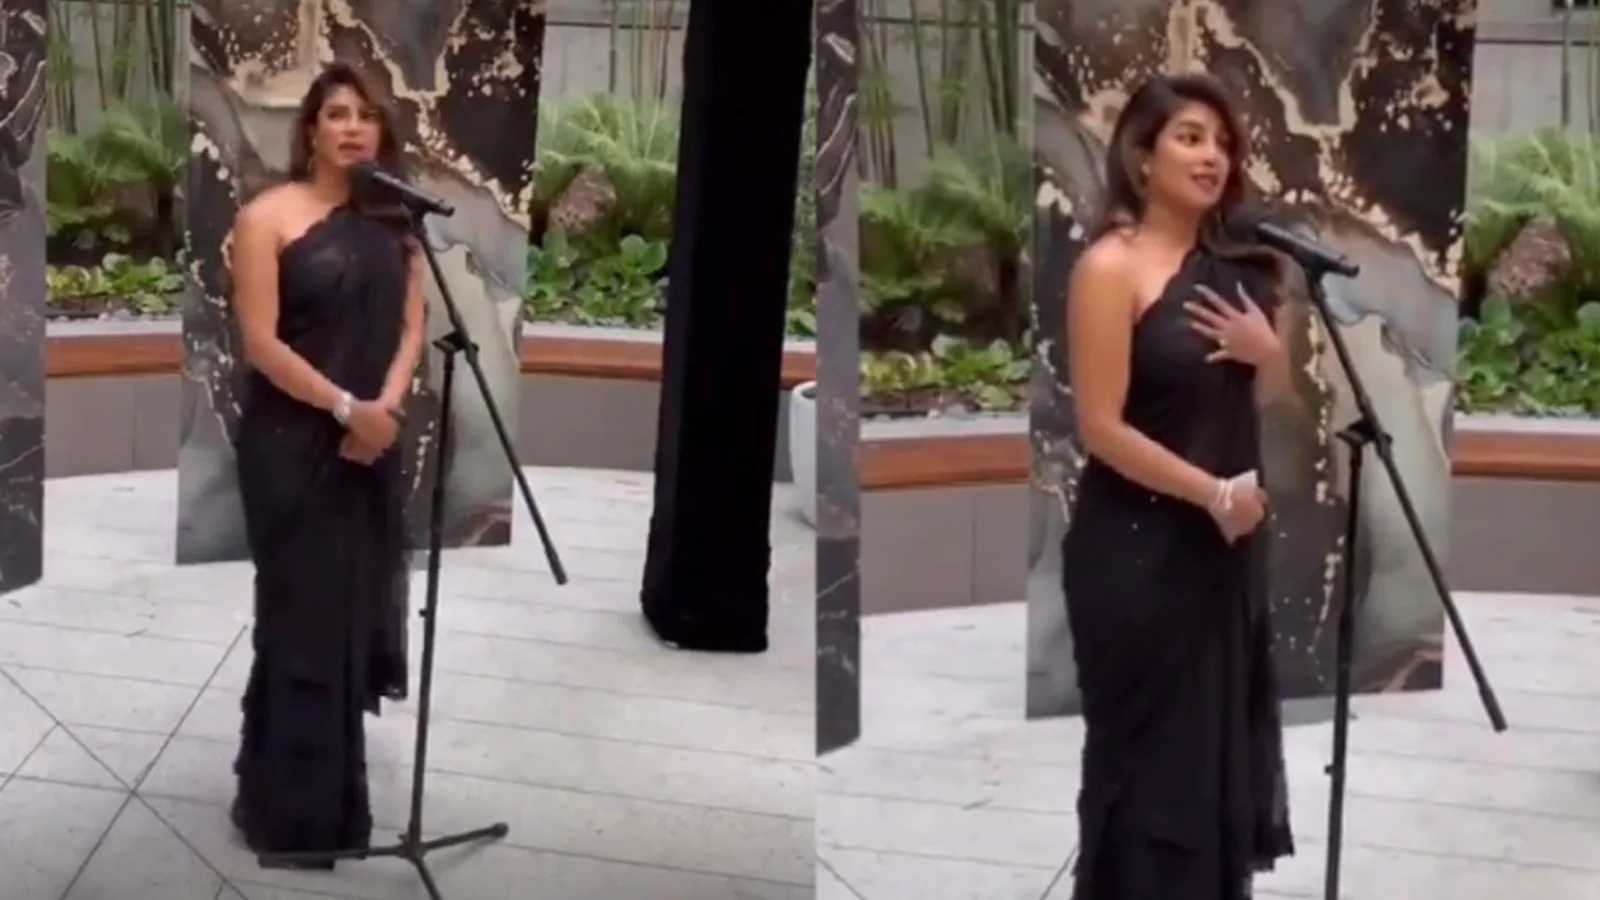 Priyanka Chopra gives impressive speech at pre-Oscars bash, talks about not going out too much after baby’s arrival